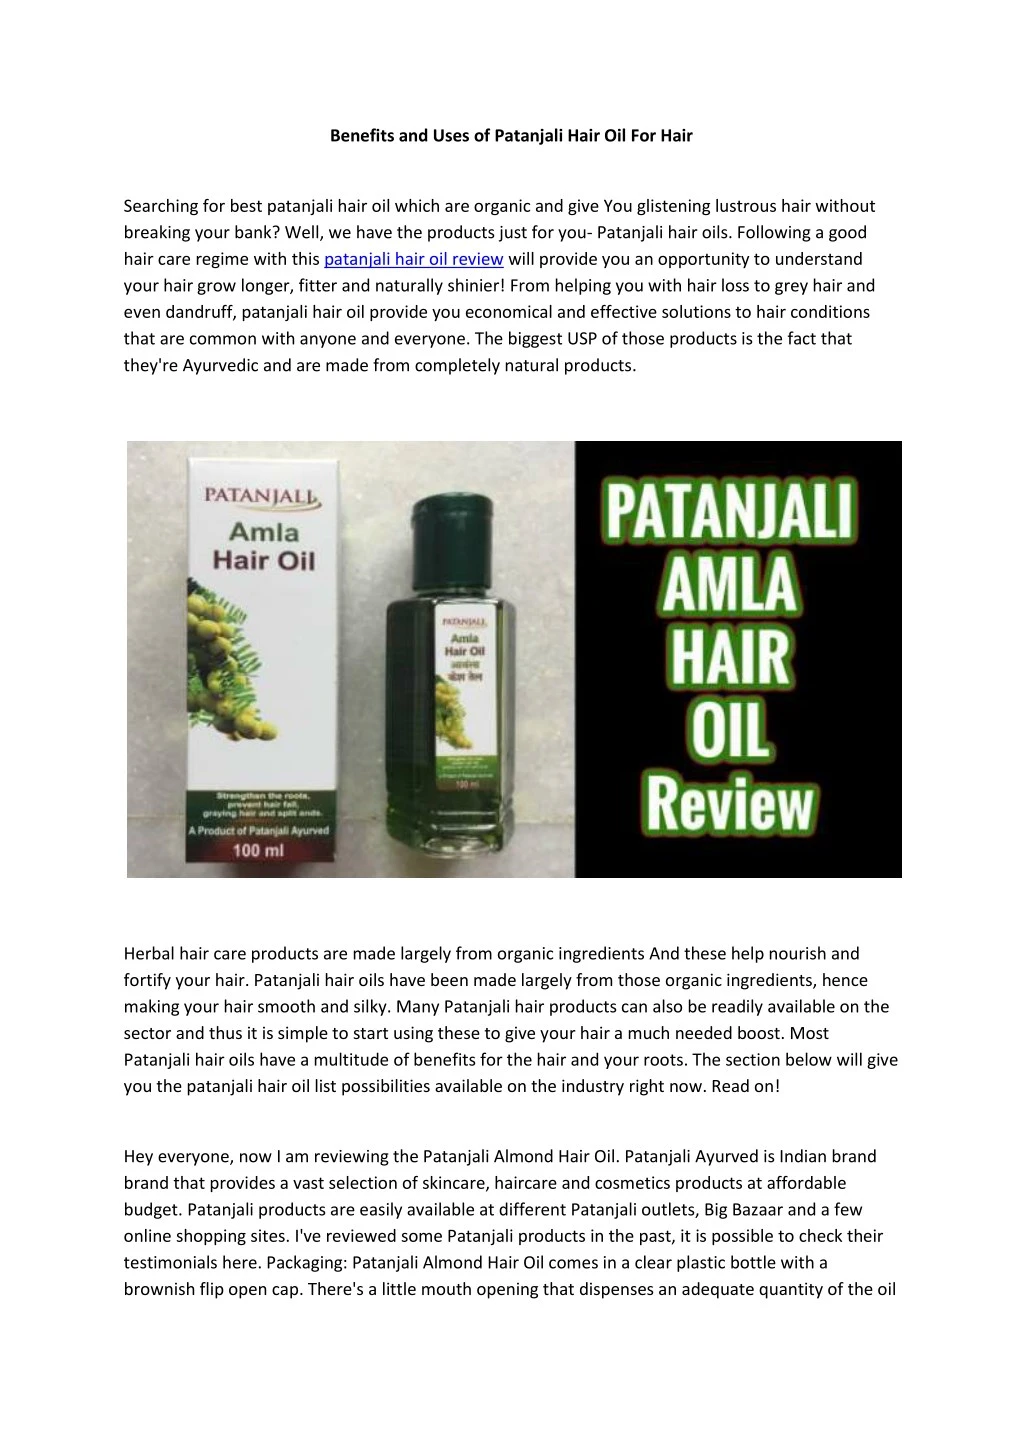 benefits and uses of patanjali hair oil for hair